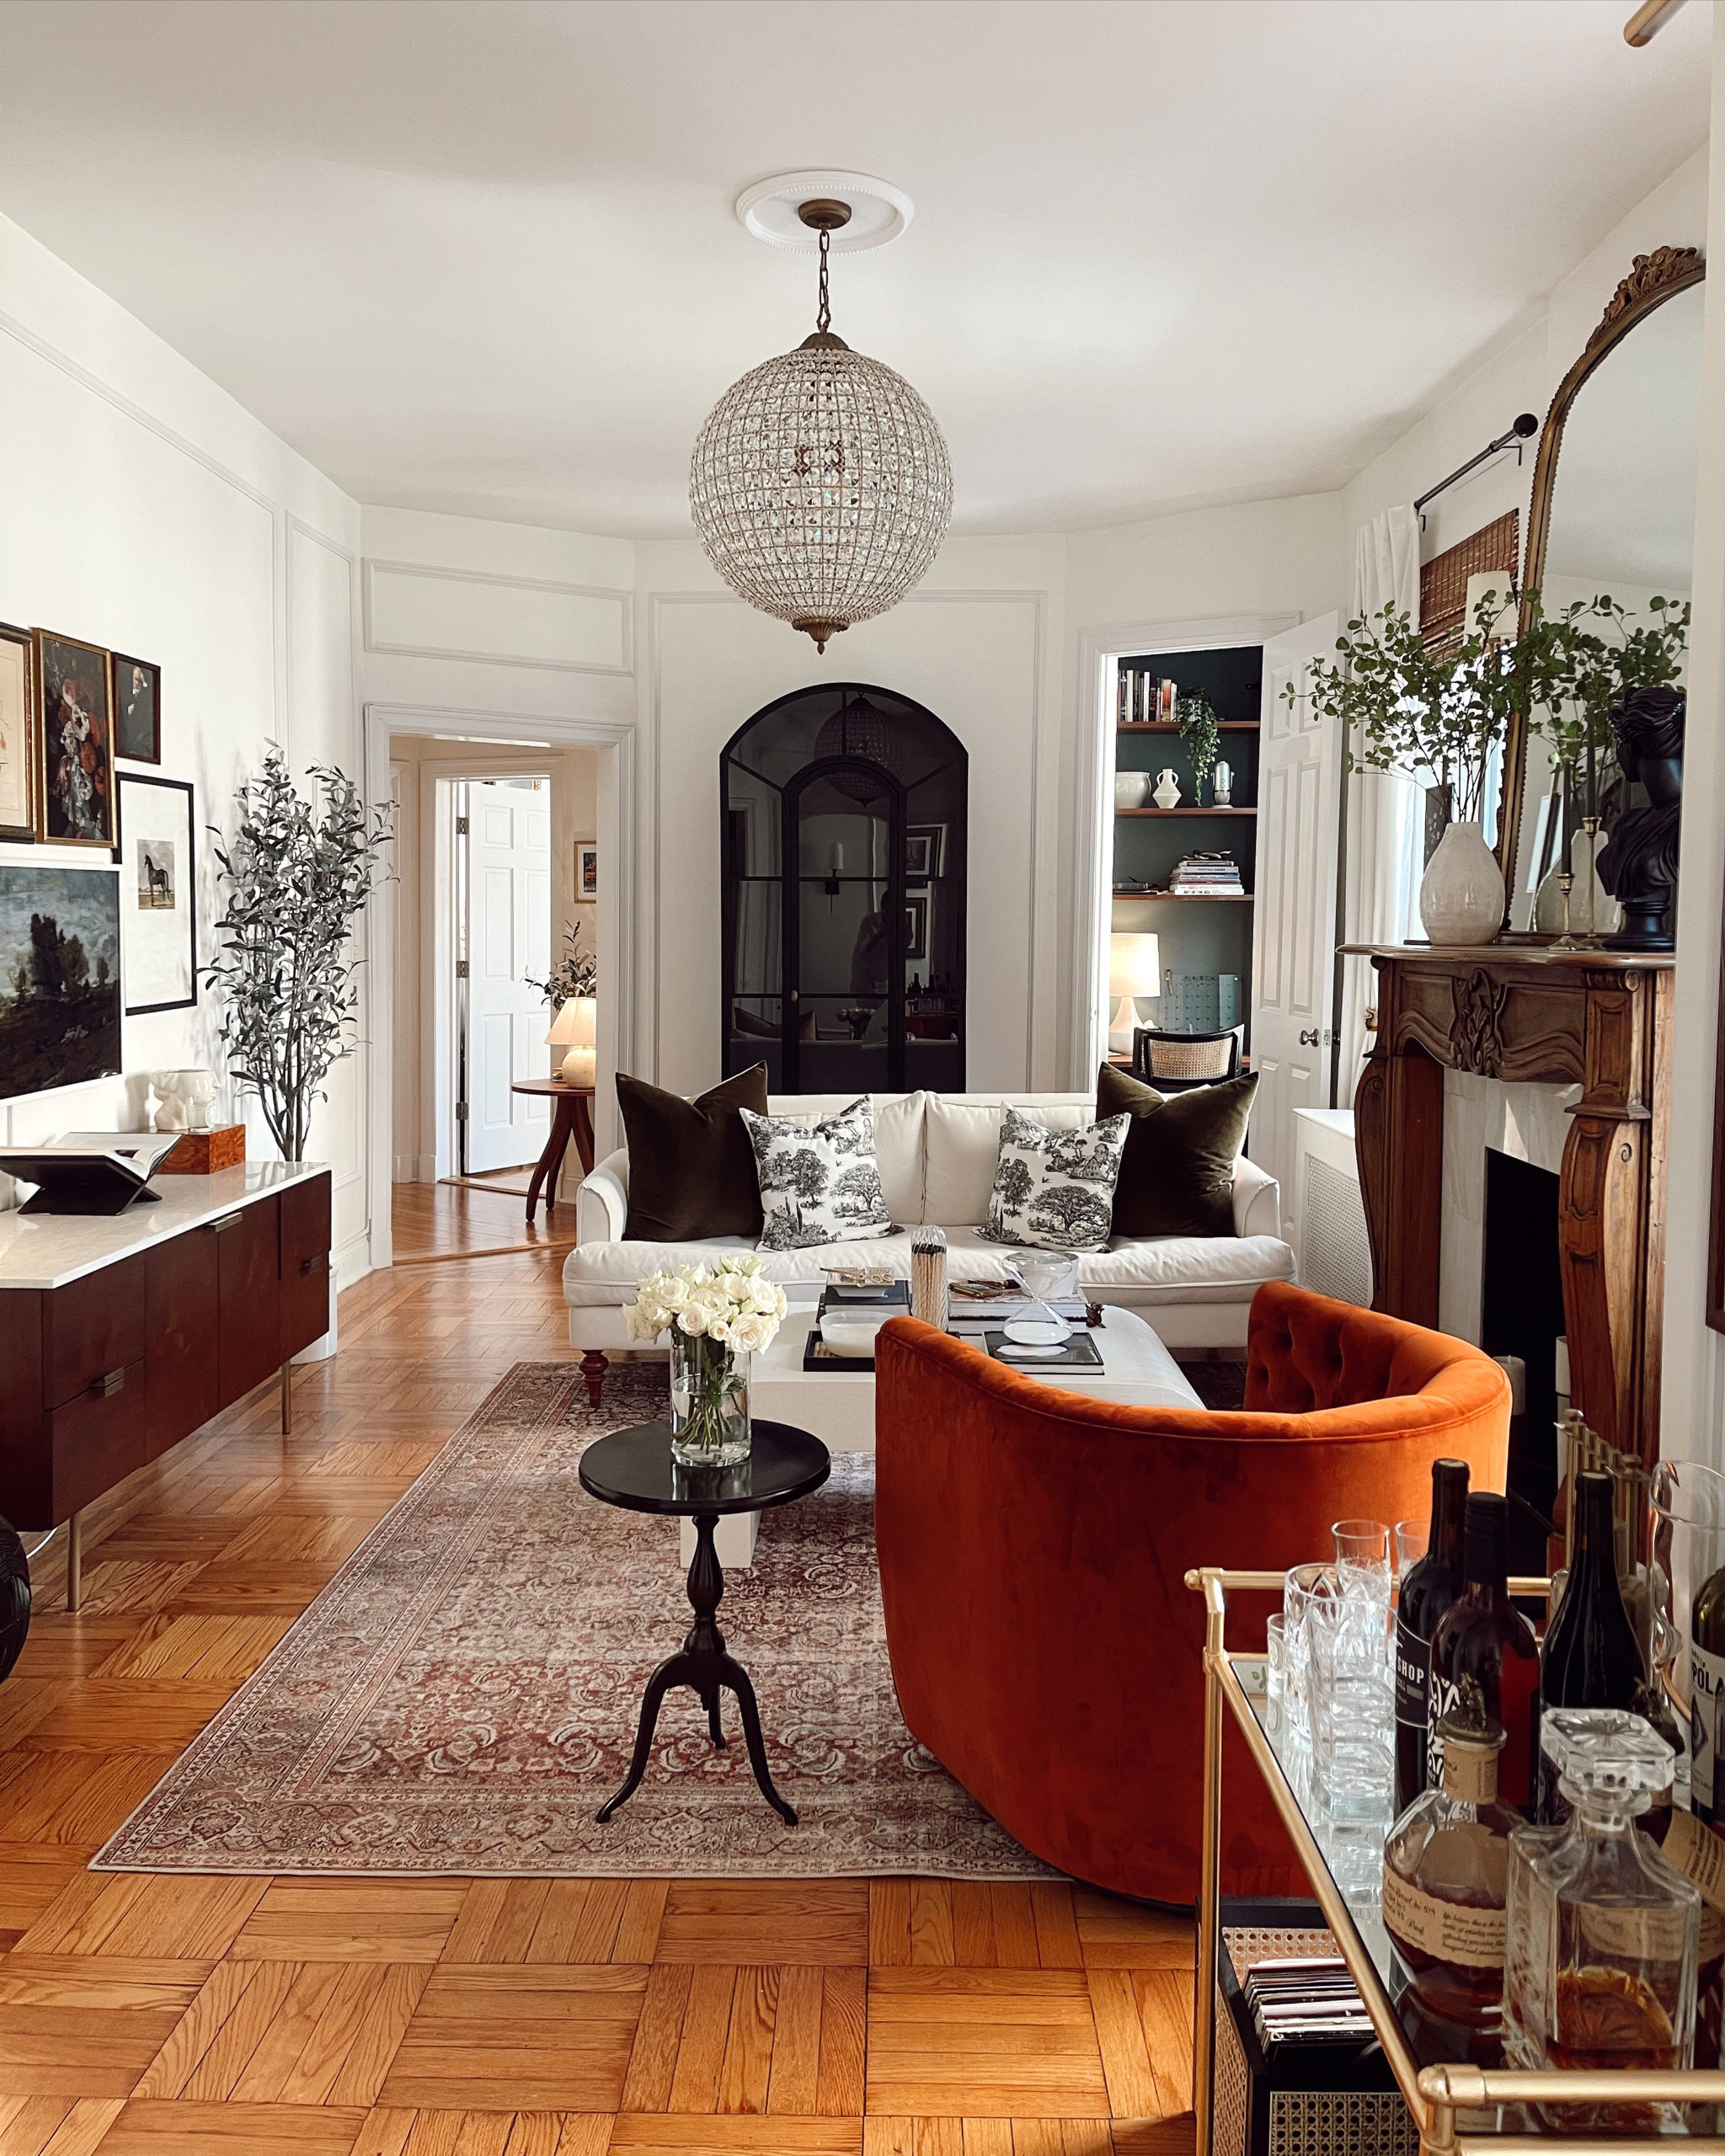 Our NYC Living Room - The Page Edit